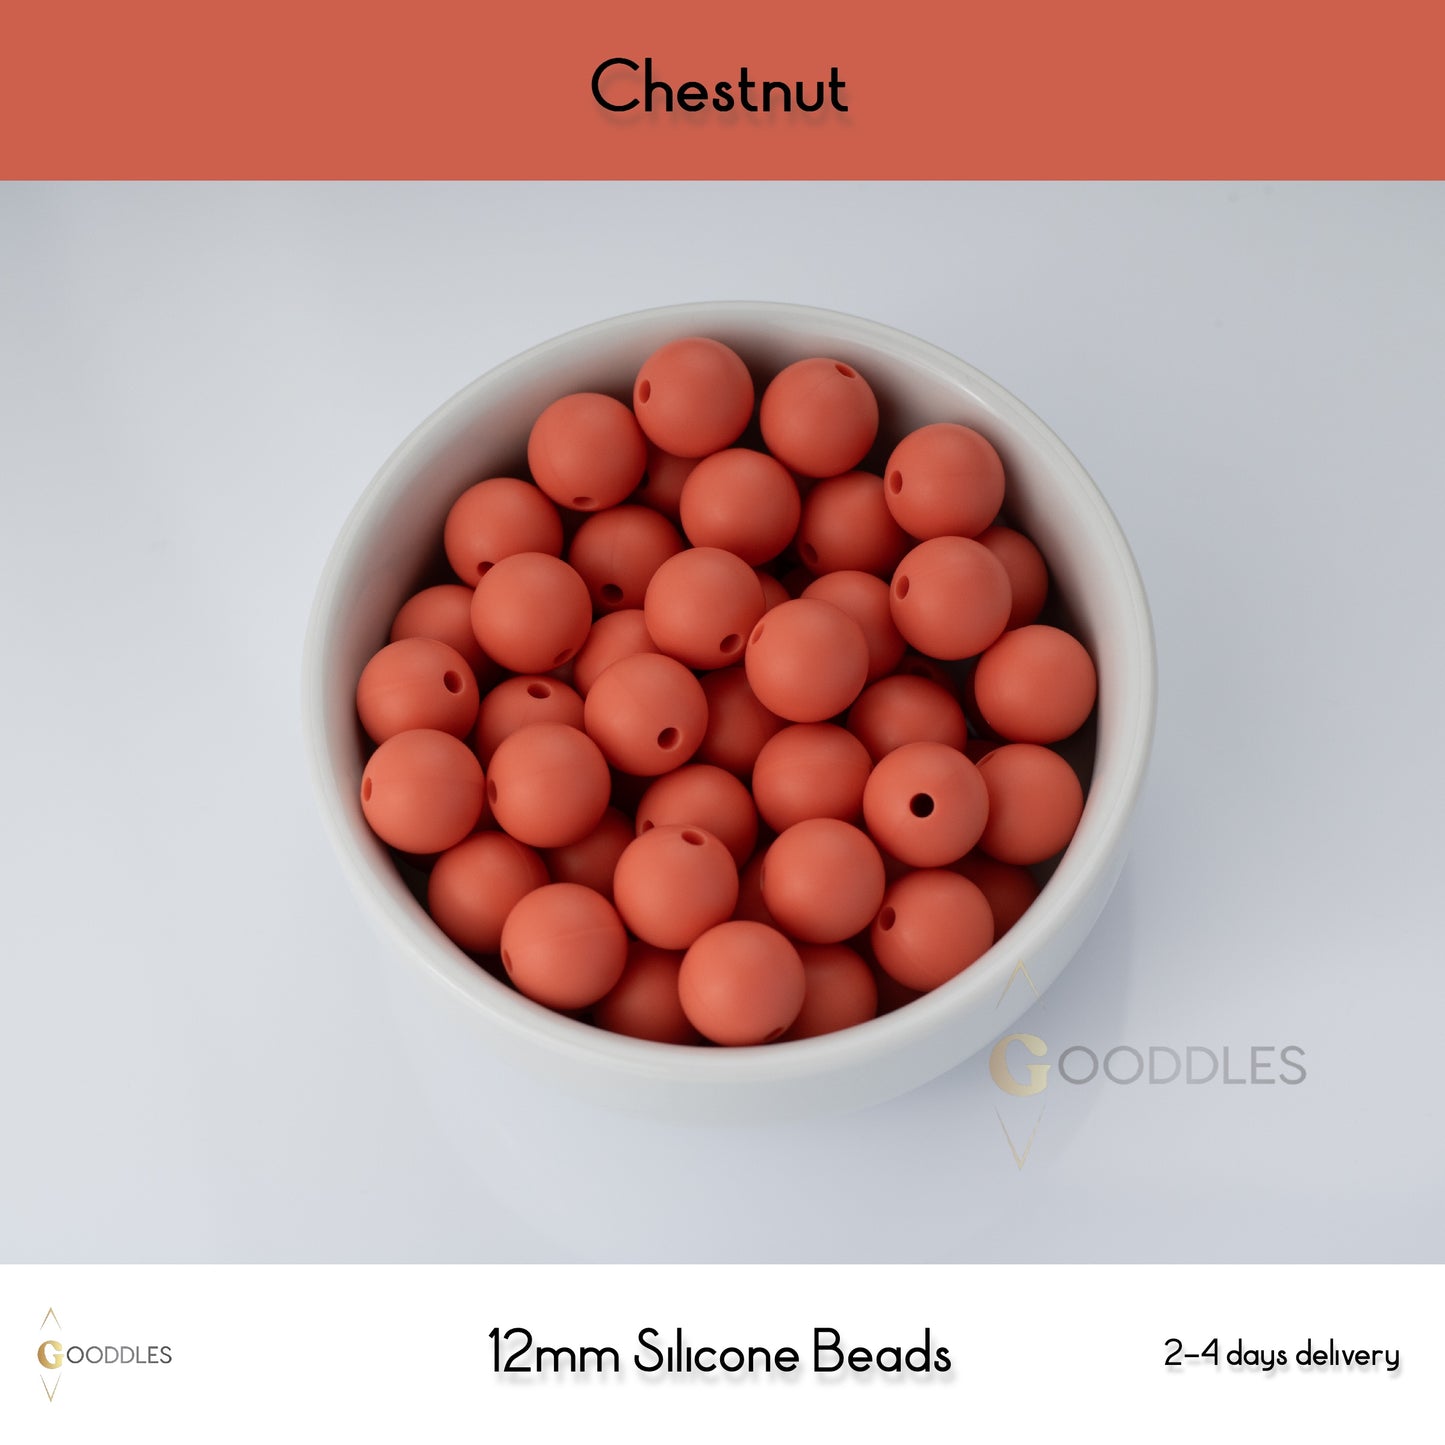 5pcs, Chestnut Silicone Beads Round Silicone Beads